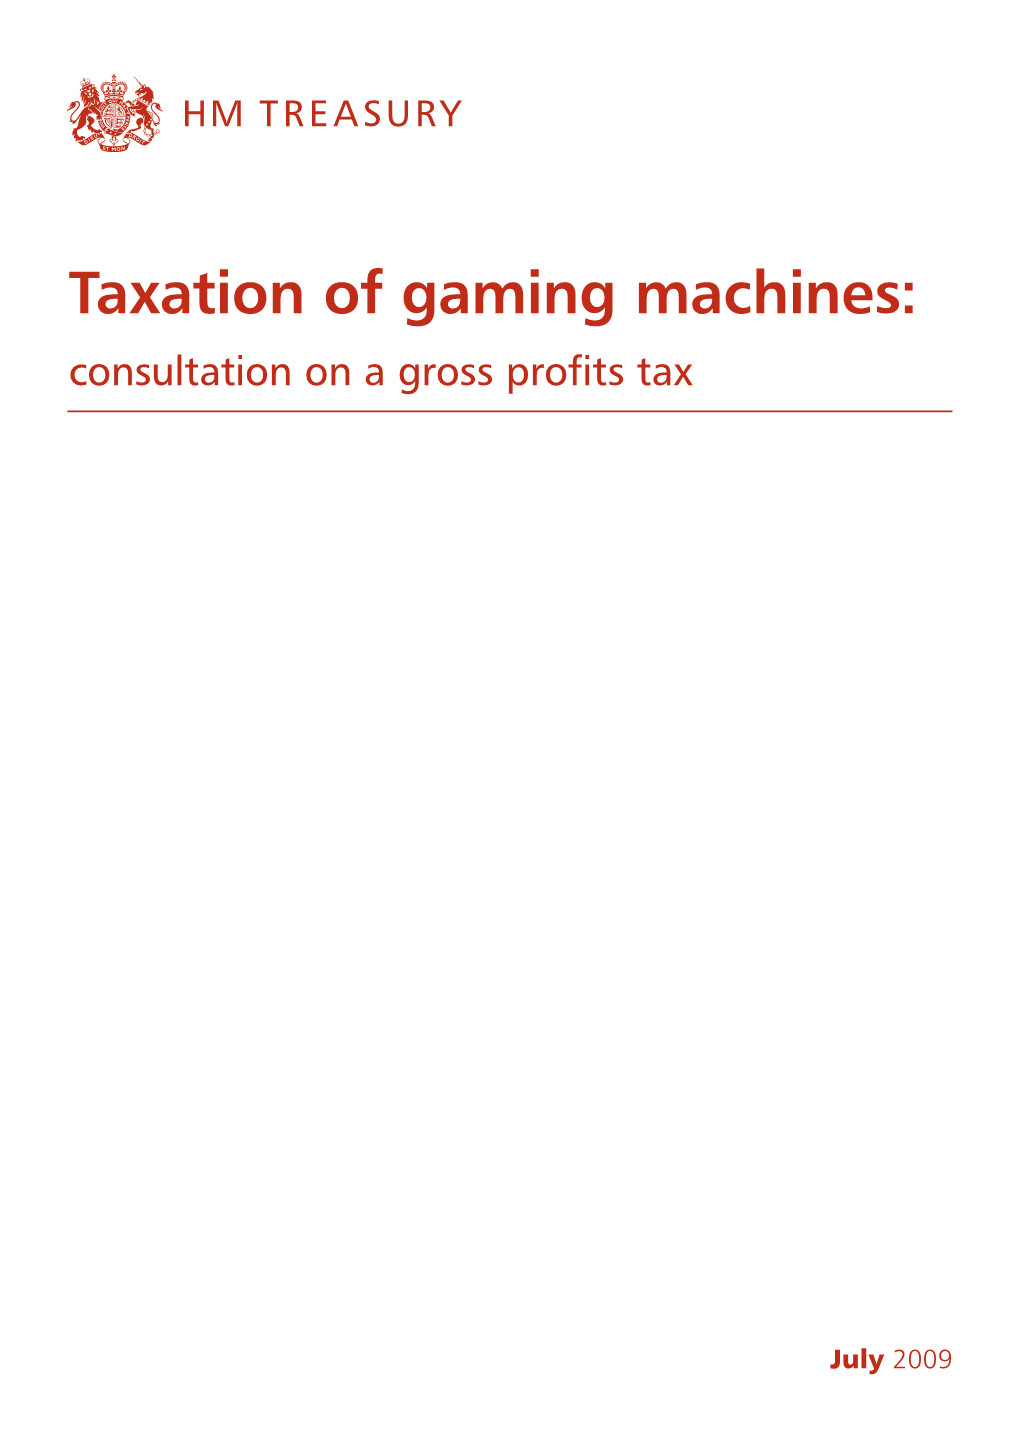 Taxation of Gaming Machines: Consultation on a Gross Profits Tax